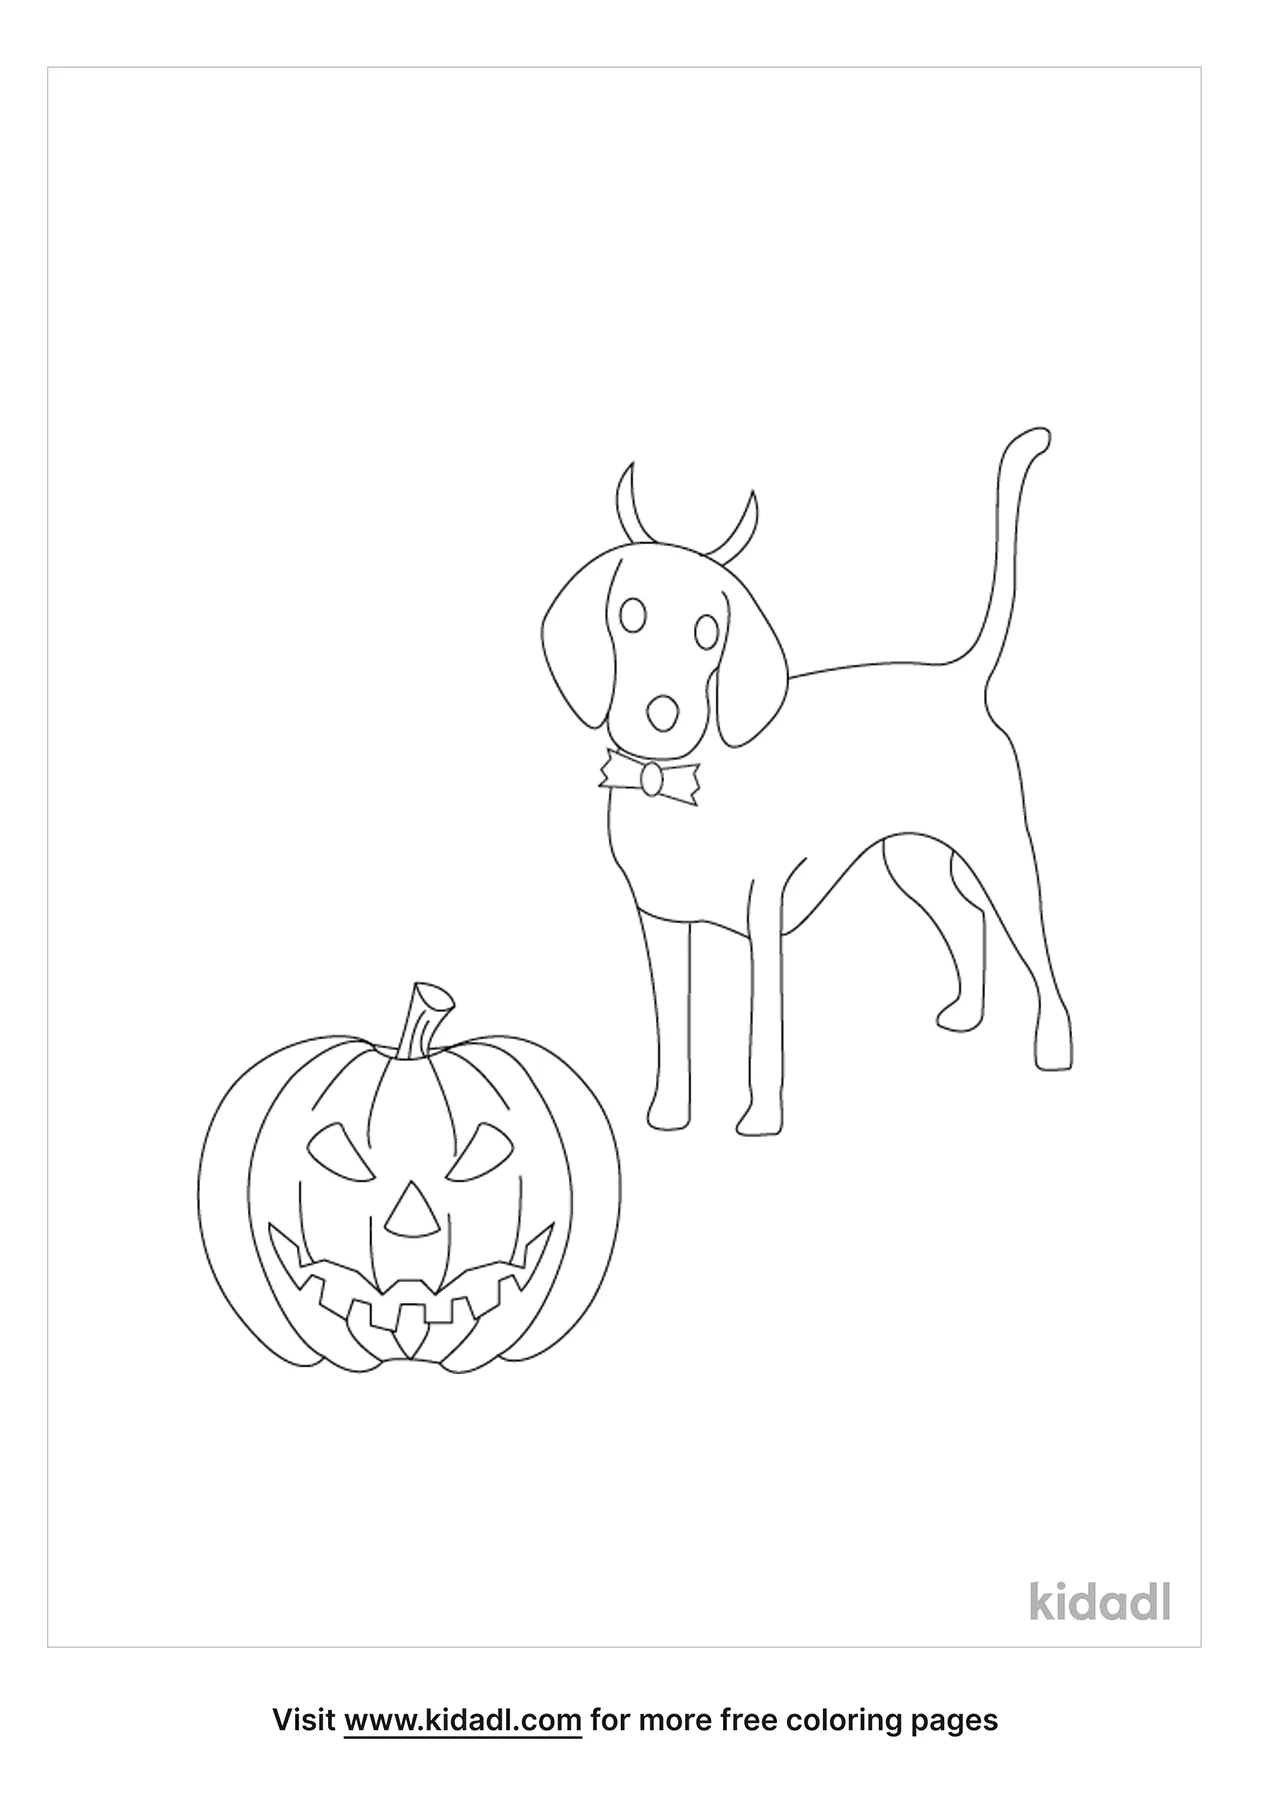 Beagle Halloween Coloring Page   Free Halloween Coloring Page   Kidadl